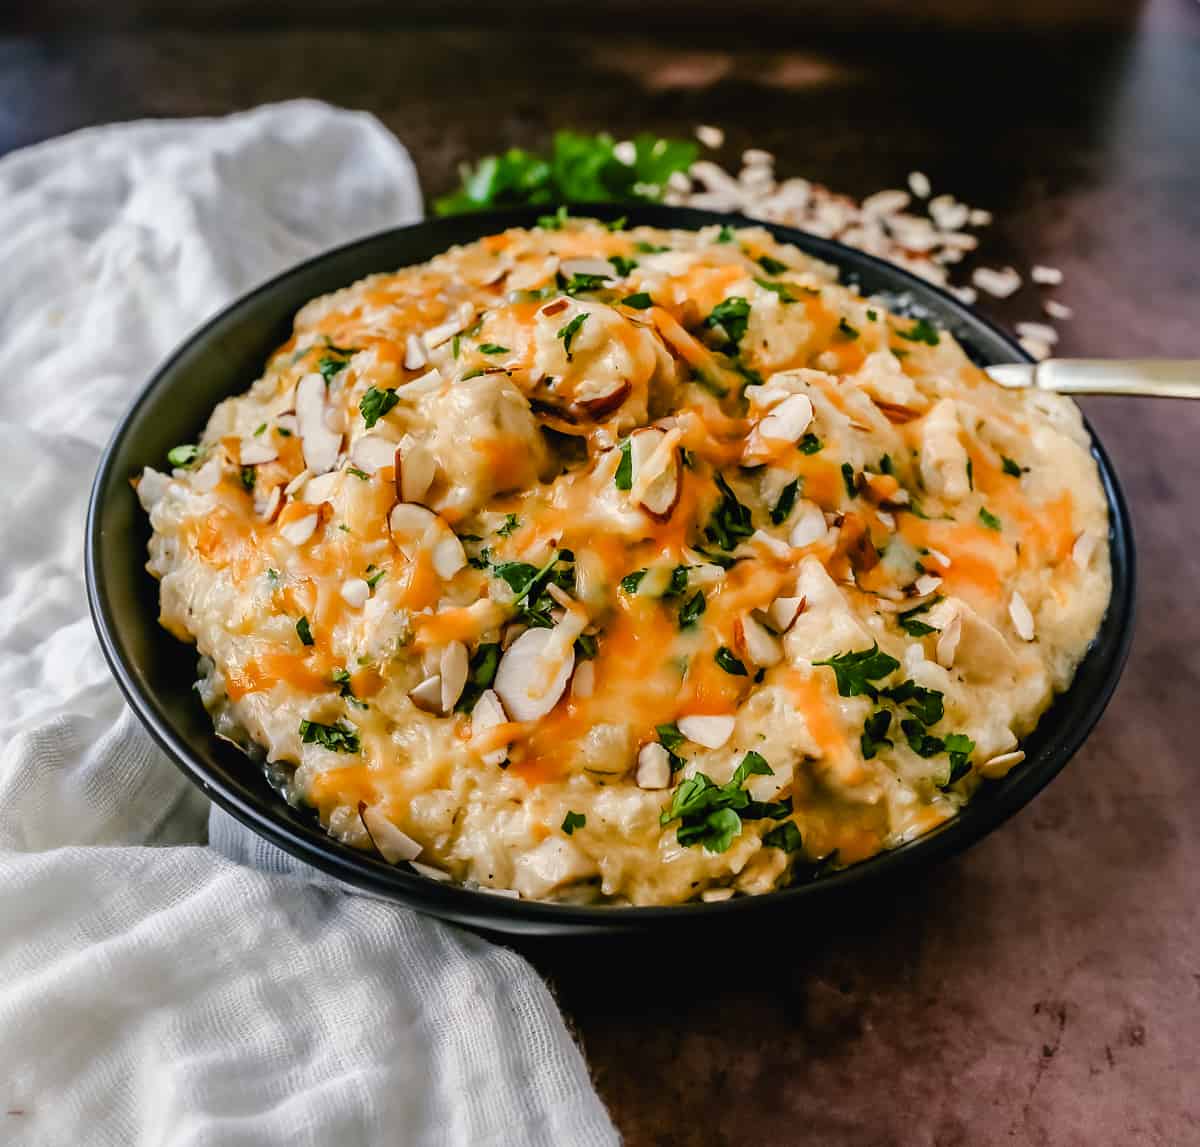 Quick and Easy Cheesy Chicken and Rice all made in one skillet. This 30-minute, no-bake chicken and rice dish is such a crowd pleaser and so easy!